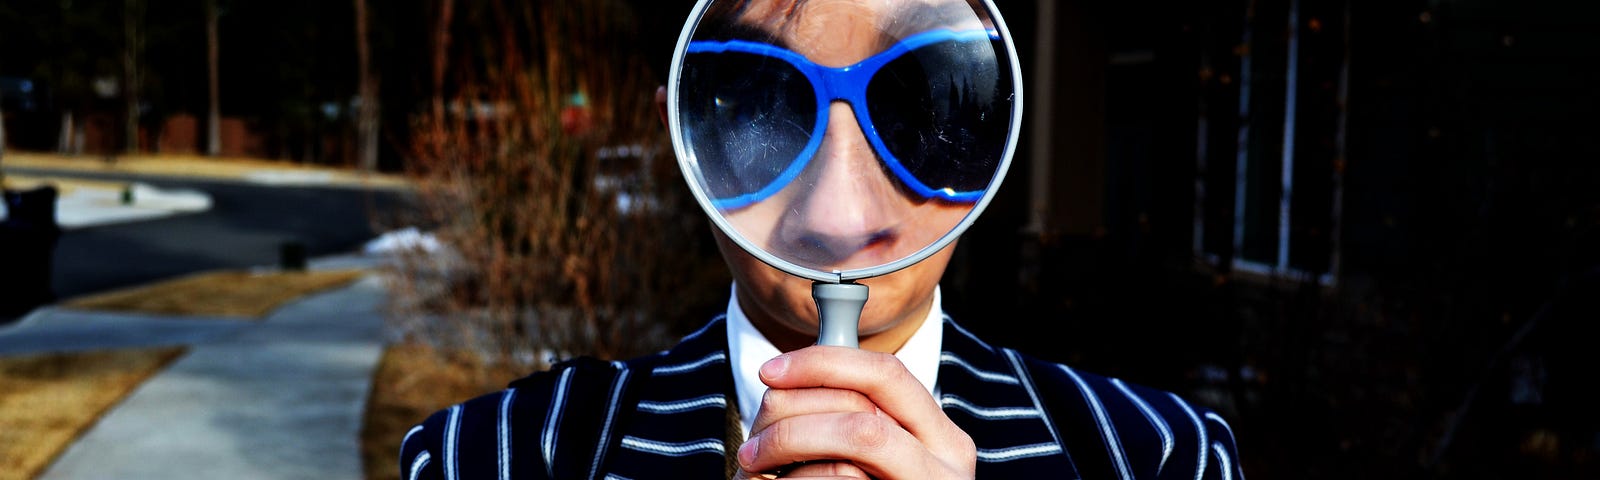 A man in a navy and white striped jacket, wearing blue framed sunglasses, holds a large magnifying glass, which reflects back a large and distorted view of his face.